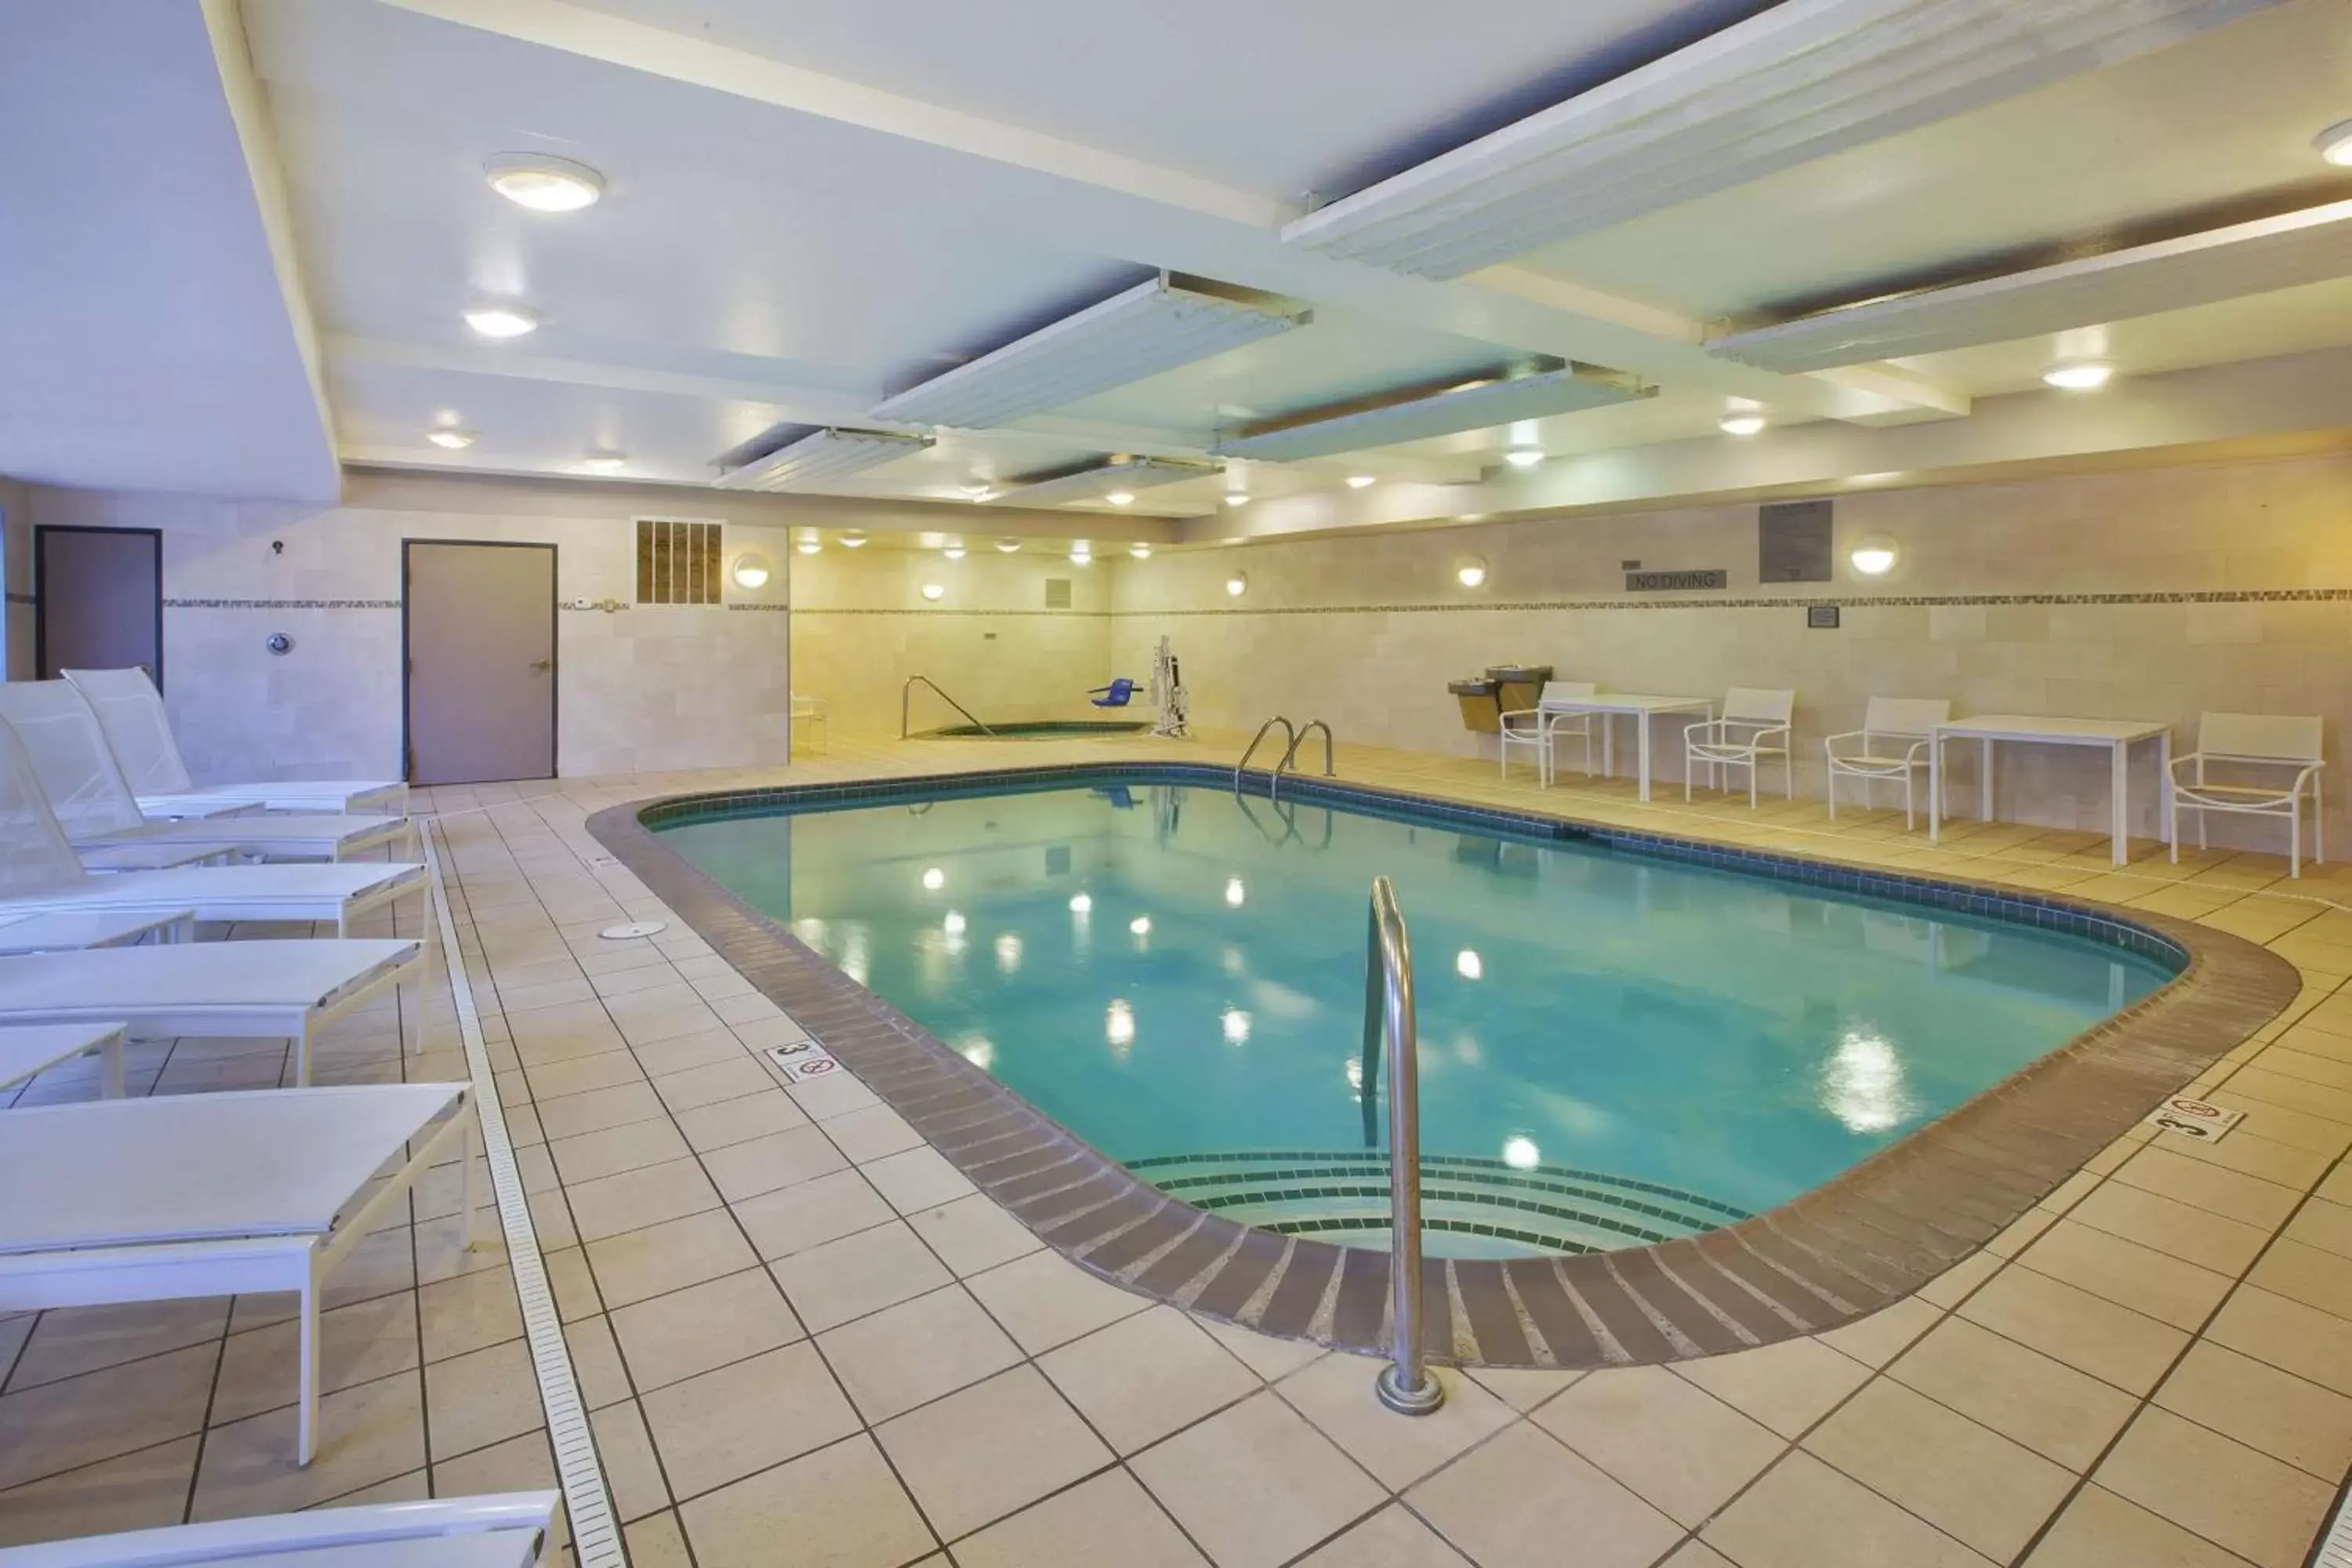 Activities, Swimming Pool in Country Inn & Suites by Radisson, Big Rapids, MI